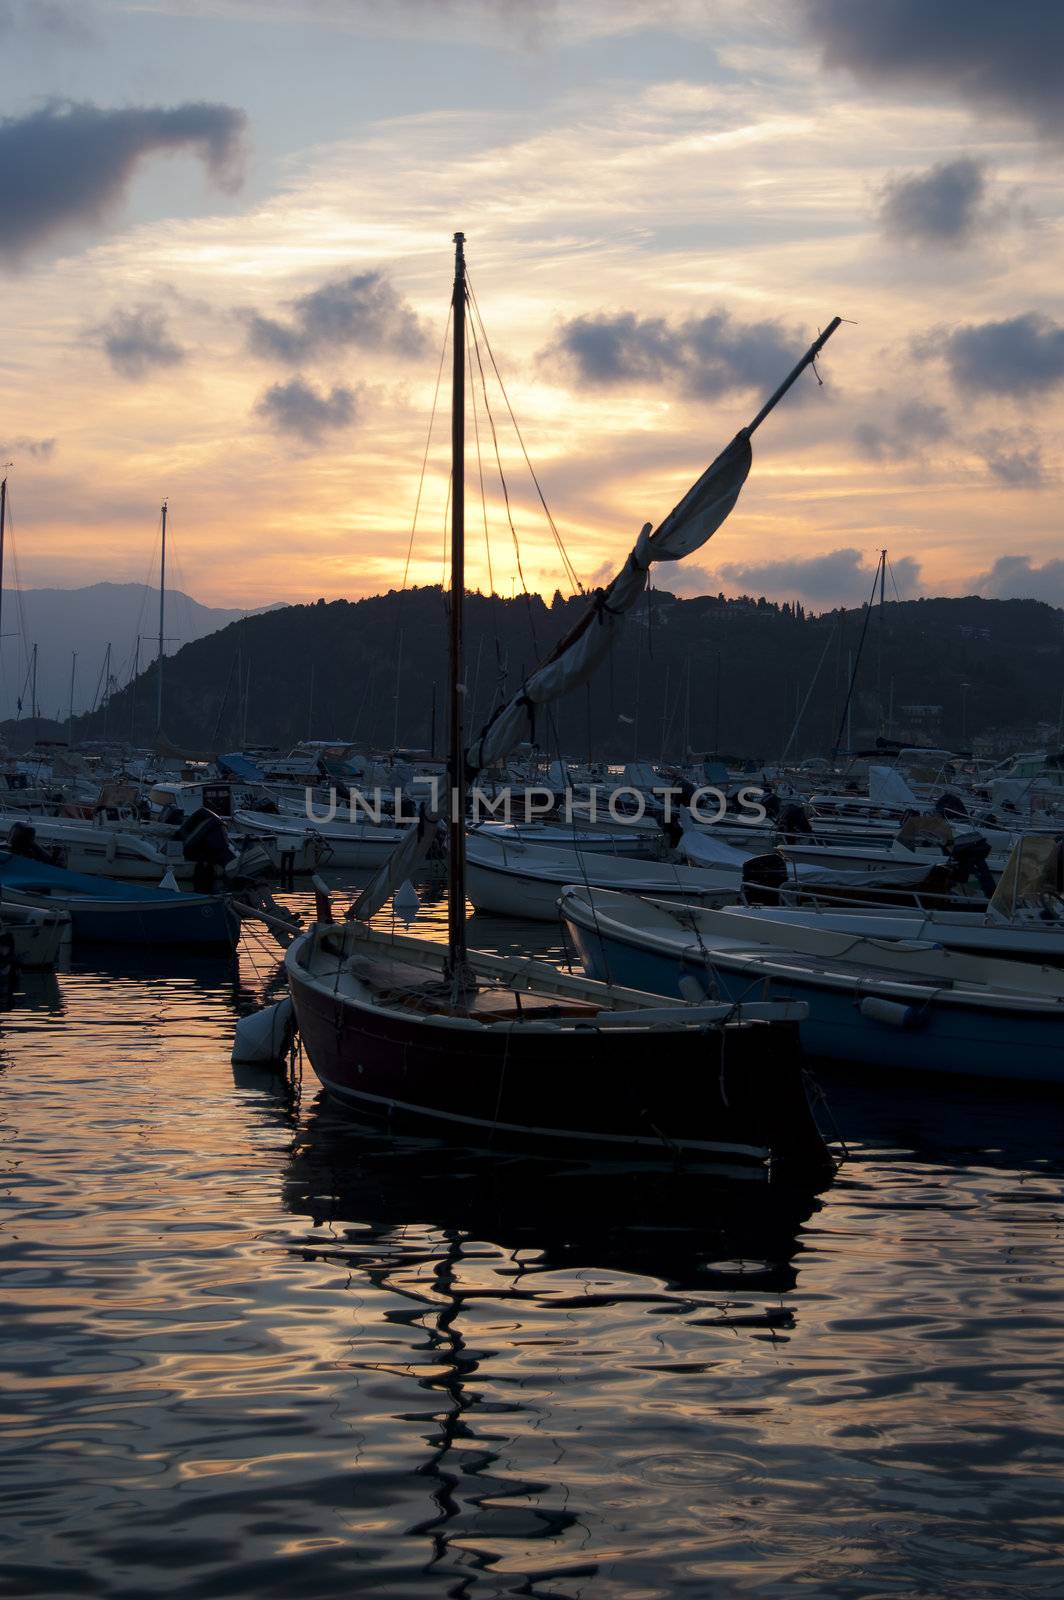 Many boat in a aharbour in the evening